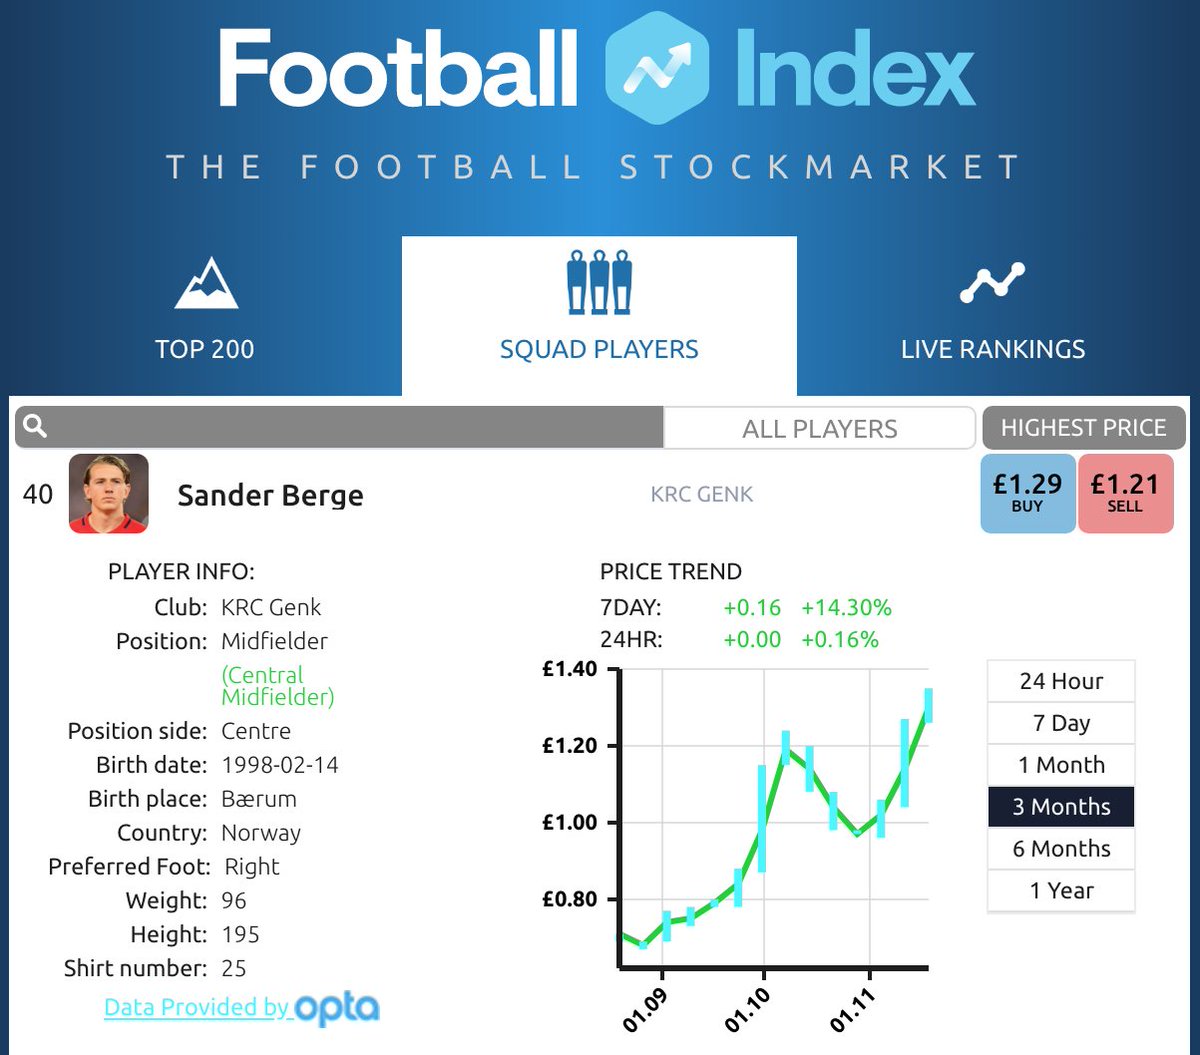 P.S. For the  #FootballIndex crowd, Berge's price has gone up this season, and there will undoubtedly be more media buzz about him when he gets his move to a bigger league. But there's a big difference between the next Busquets or Kanté and the next Kondogbia. Any thoughts? 